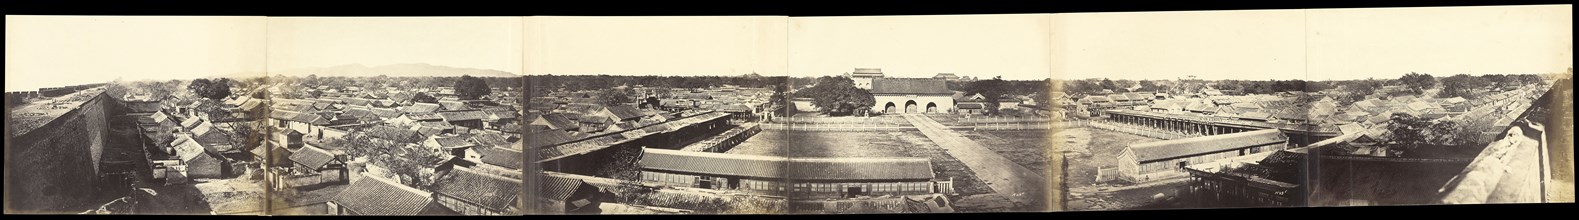 Panorama of Peking, Taken from the South Gate, Leading into the Chinese City; Felice Beato, 1832 - 1909